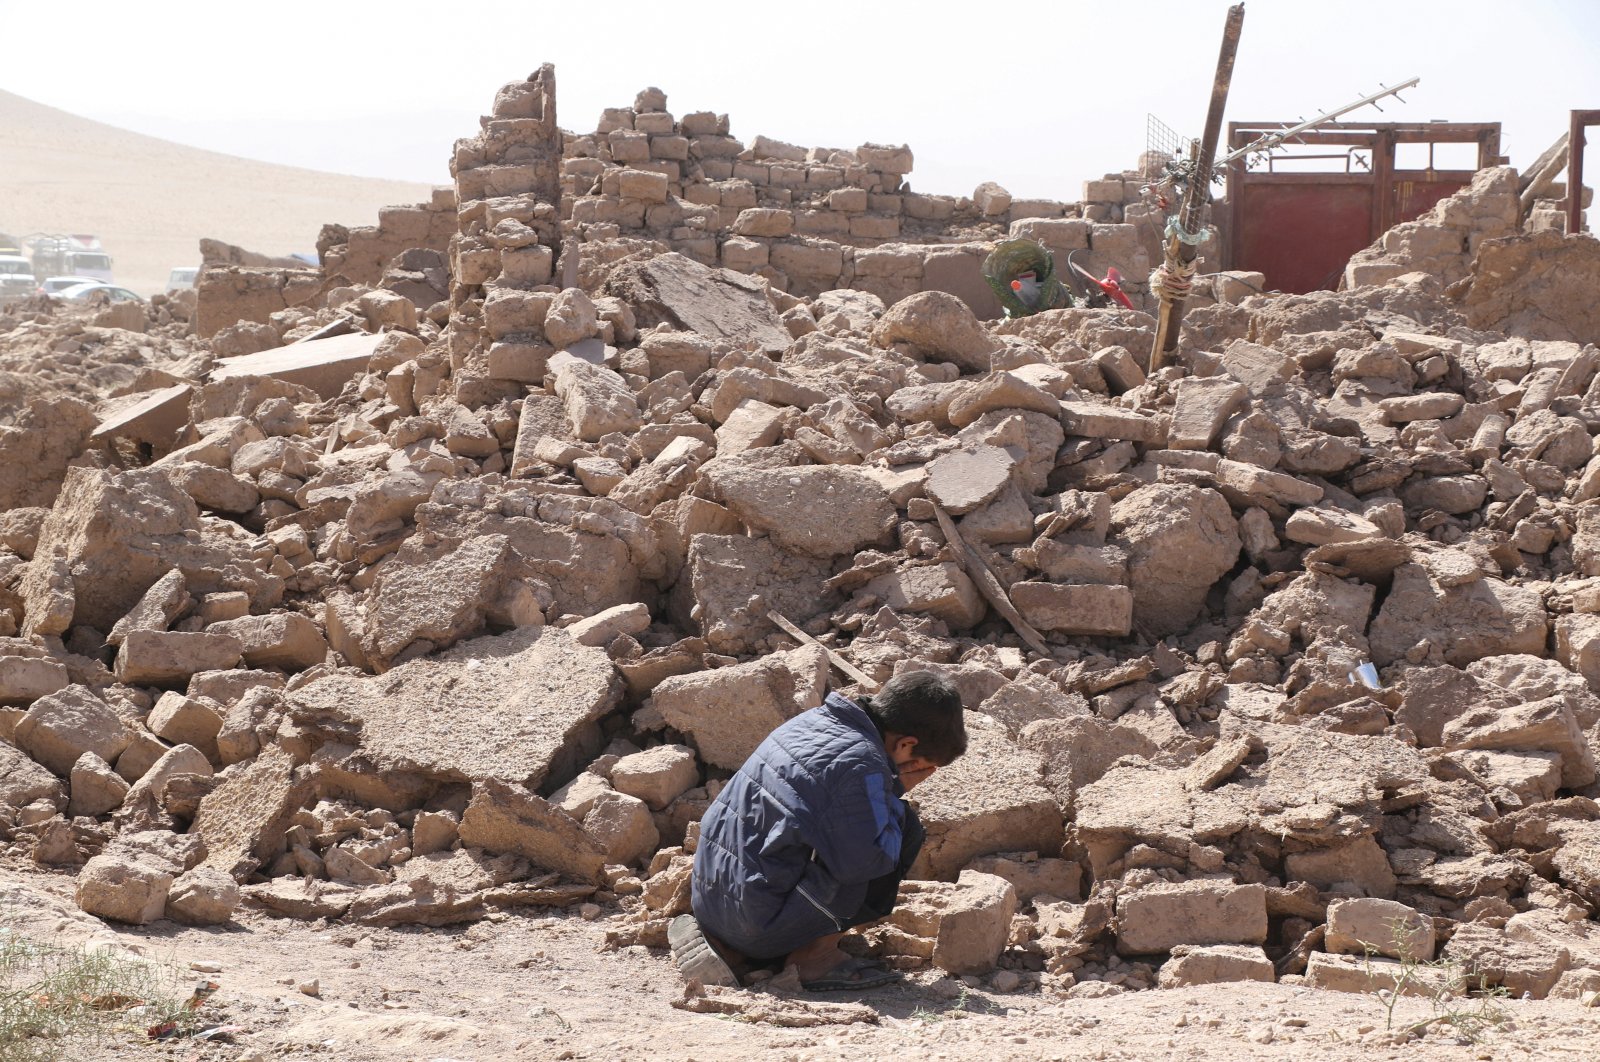 A boy cries as he sits next to debris, in the aftermath of an earthquake in the district of Zendeh Jan, Herat, Afghanistan, Oct. 8, 2023. (Reuters Photo)